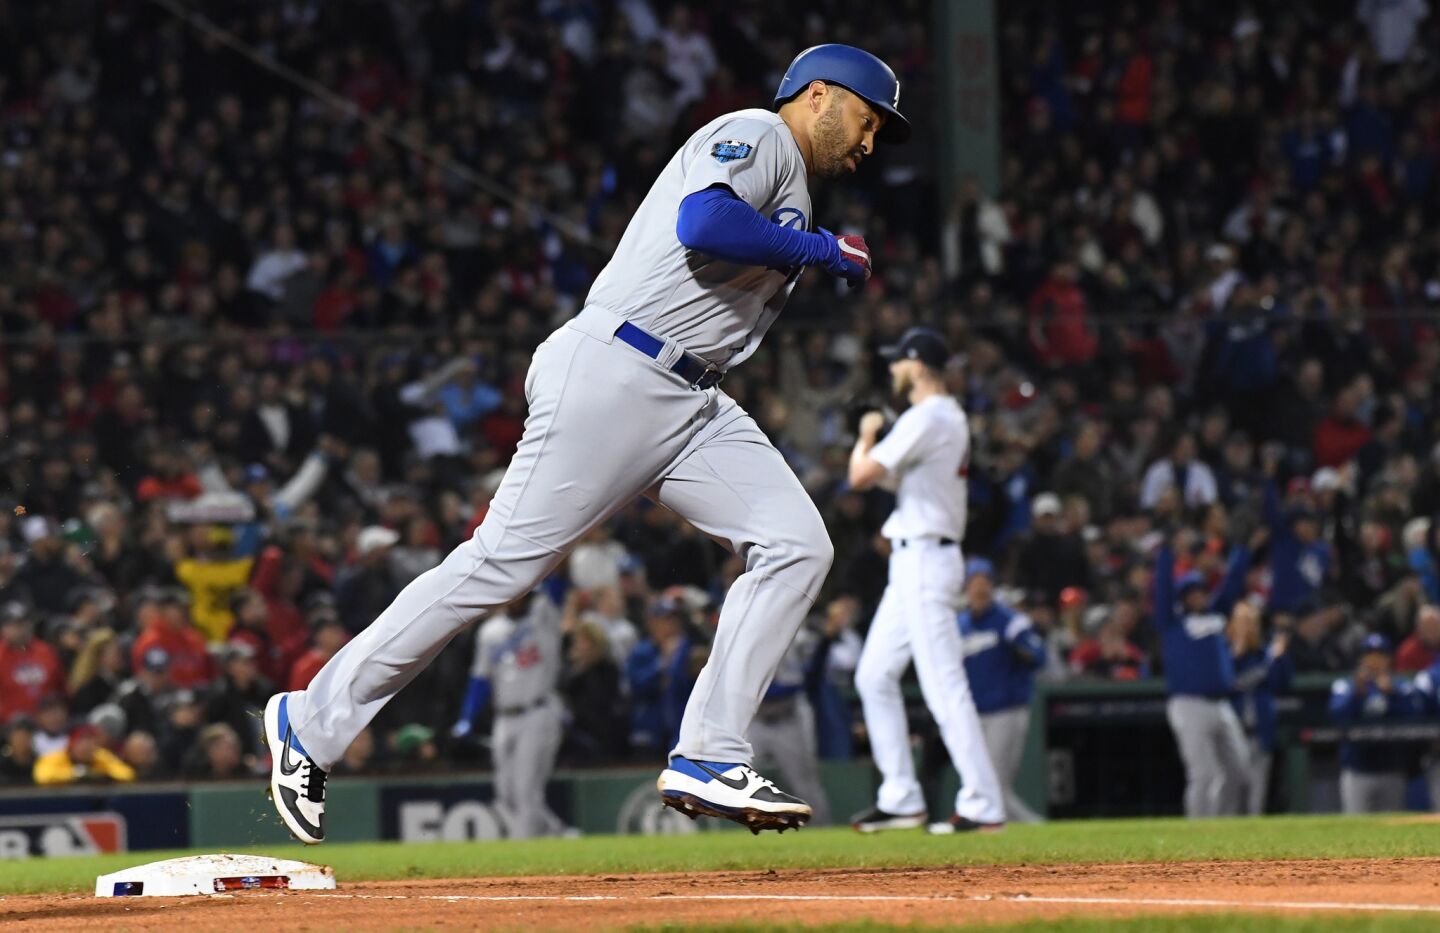 Dodgers Matt Kemp homers off Red Sox pitcher Chris Sale in the second inning.